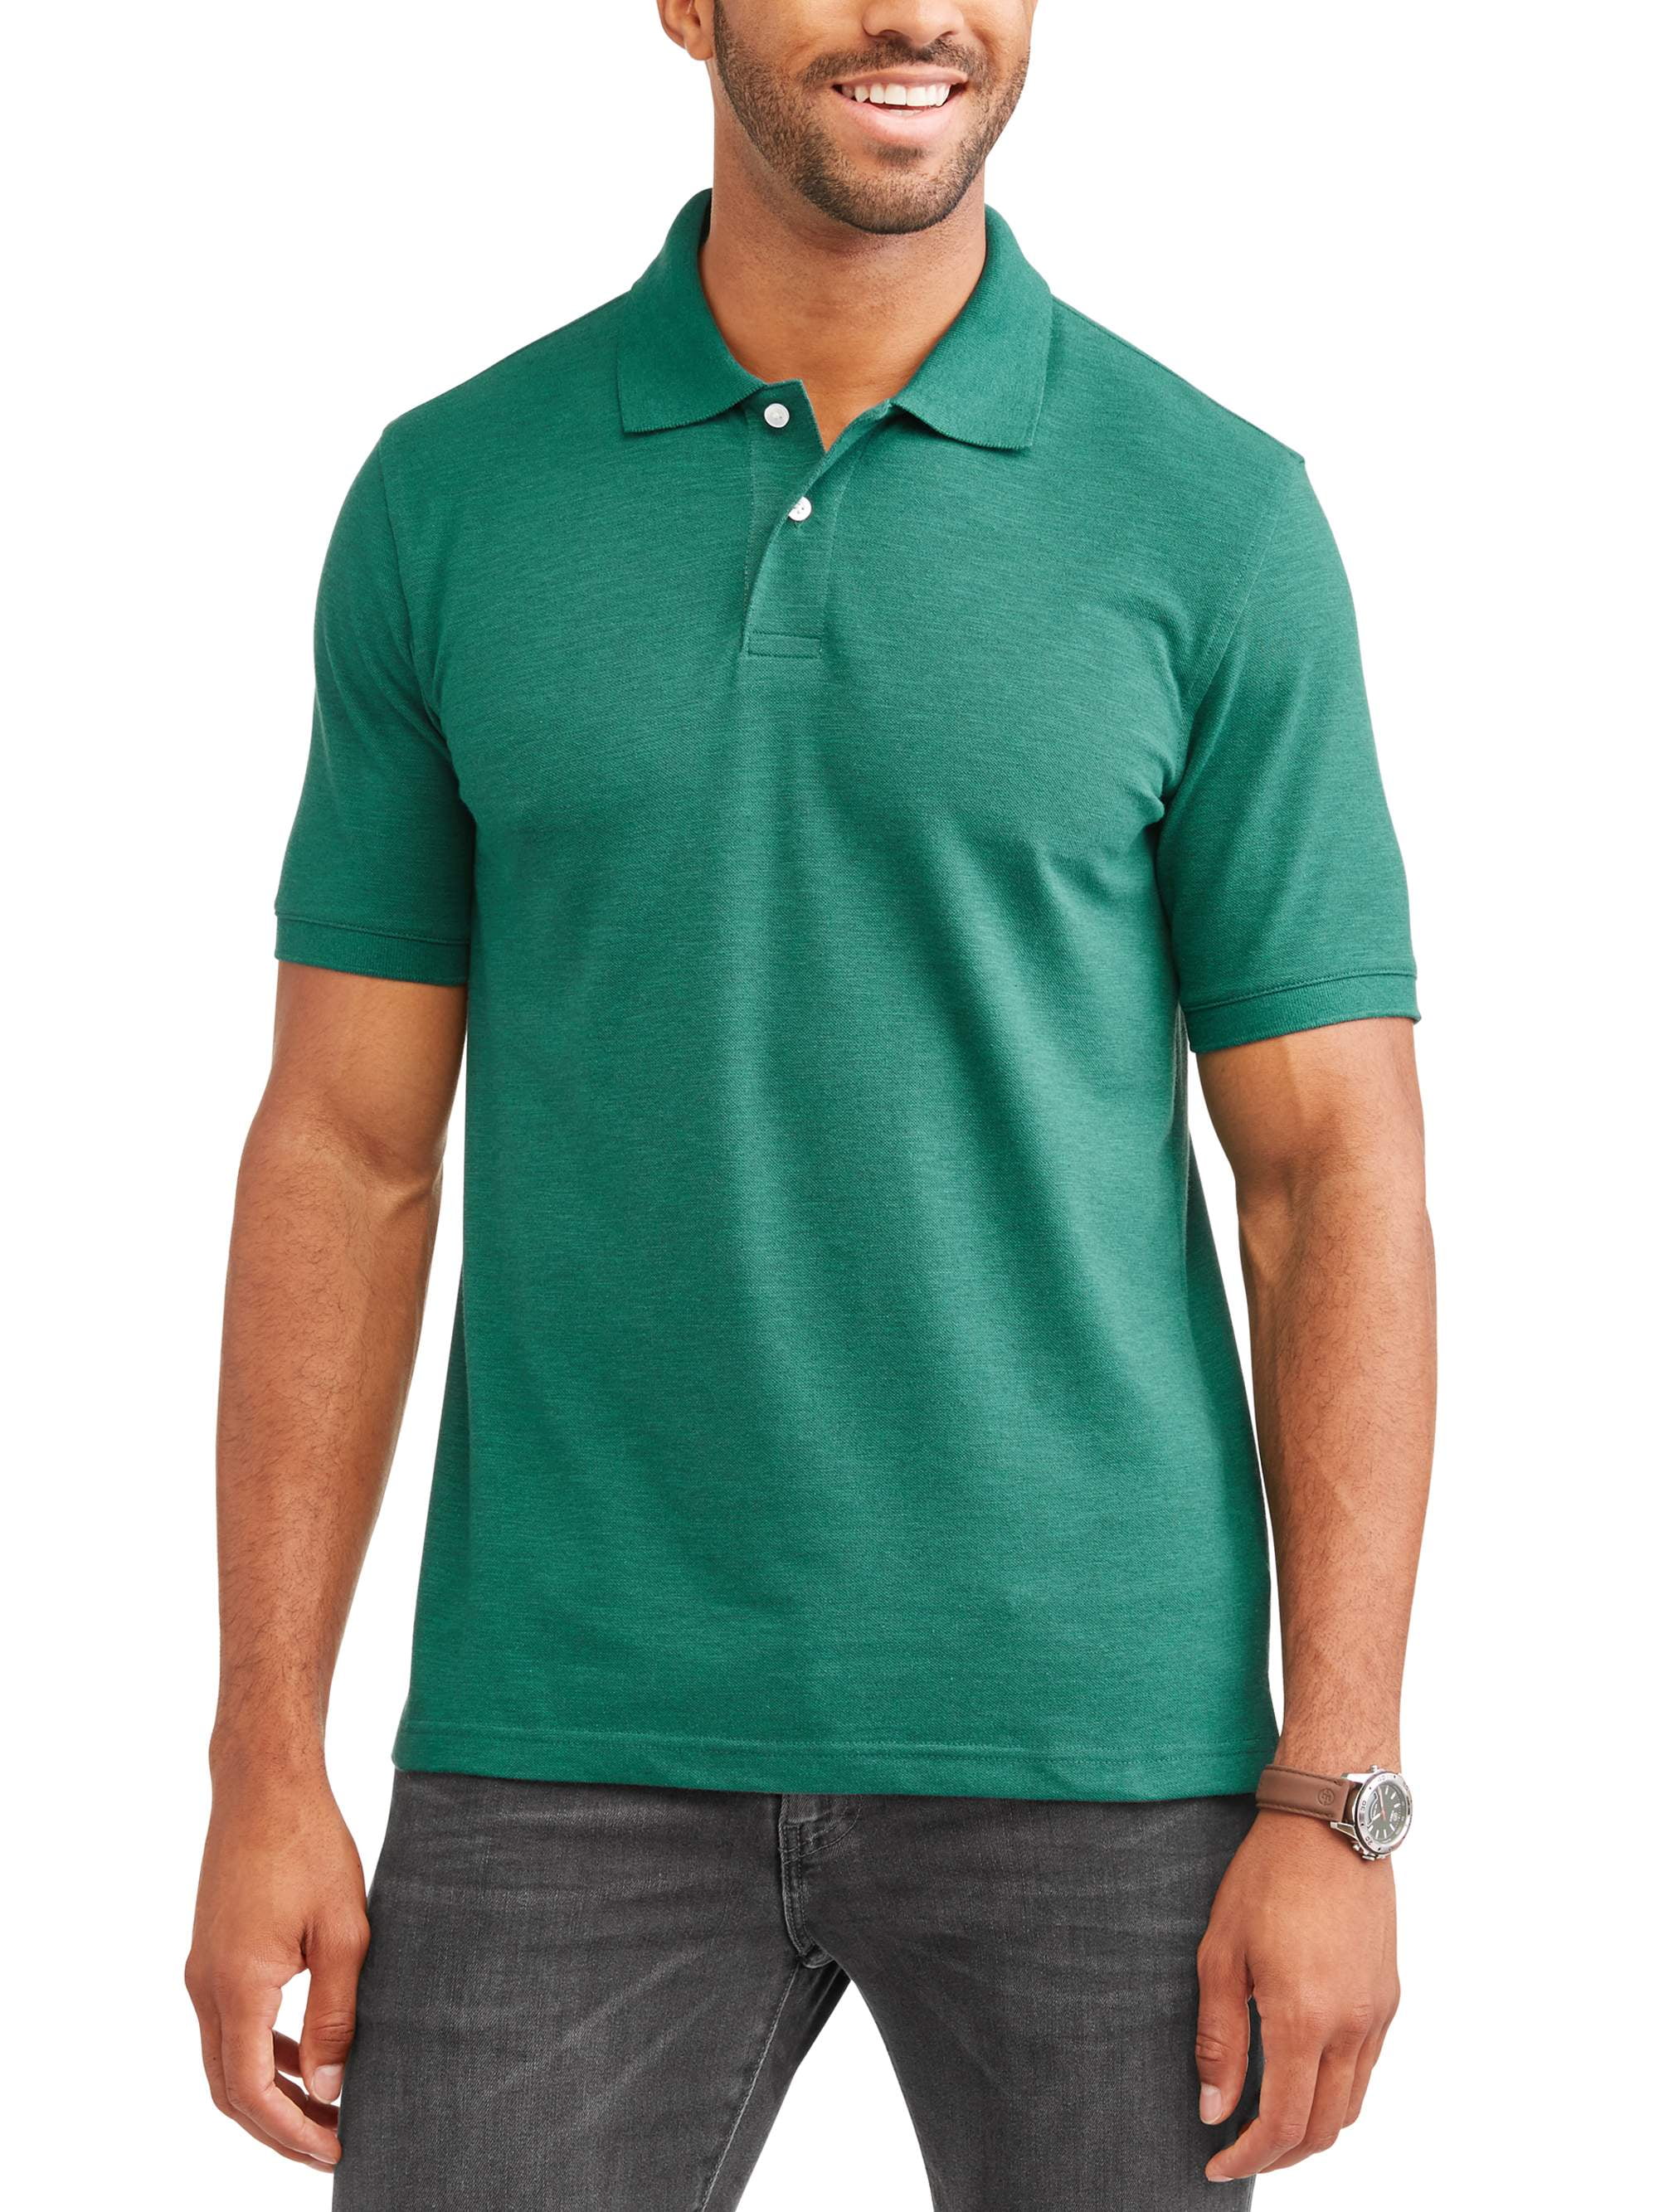 George Men's Short Sleeve Pique Polo,Up to Size 5XL - Walmart.com